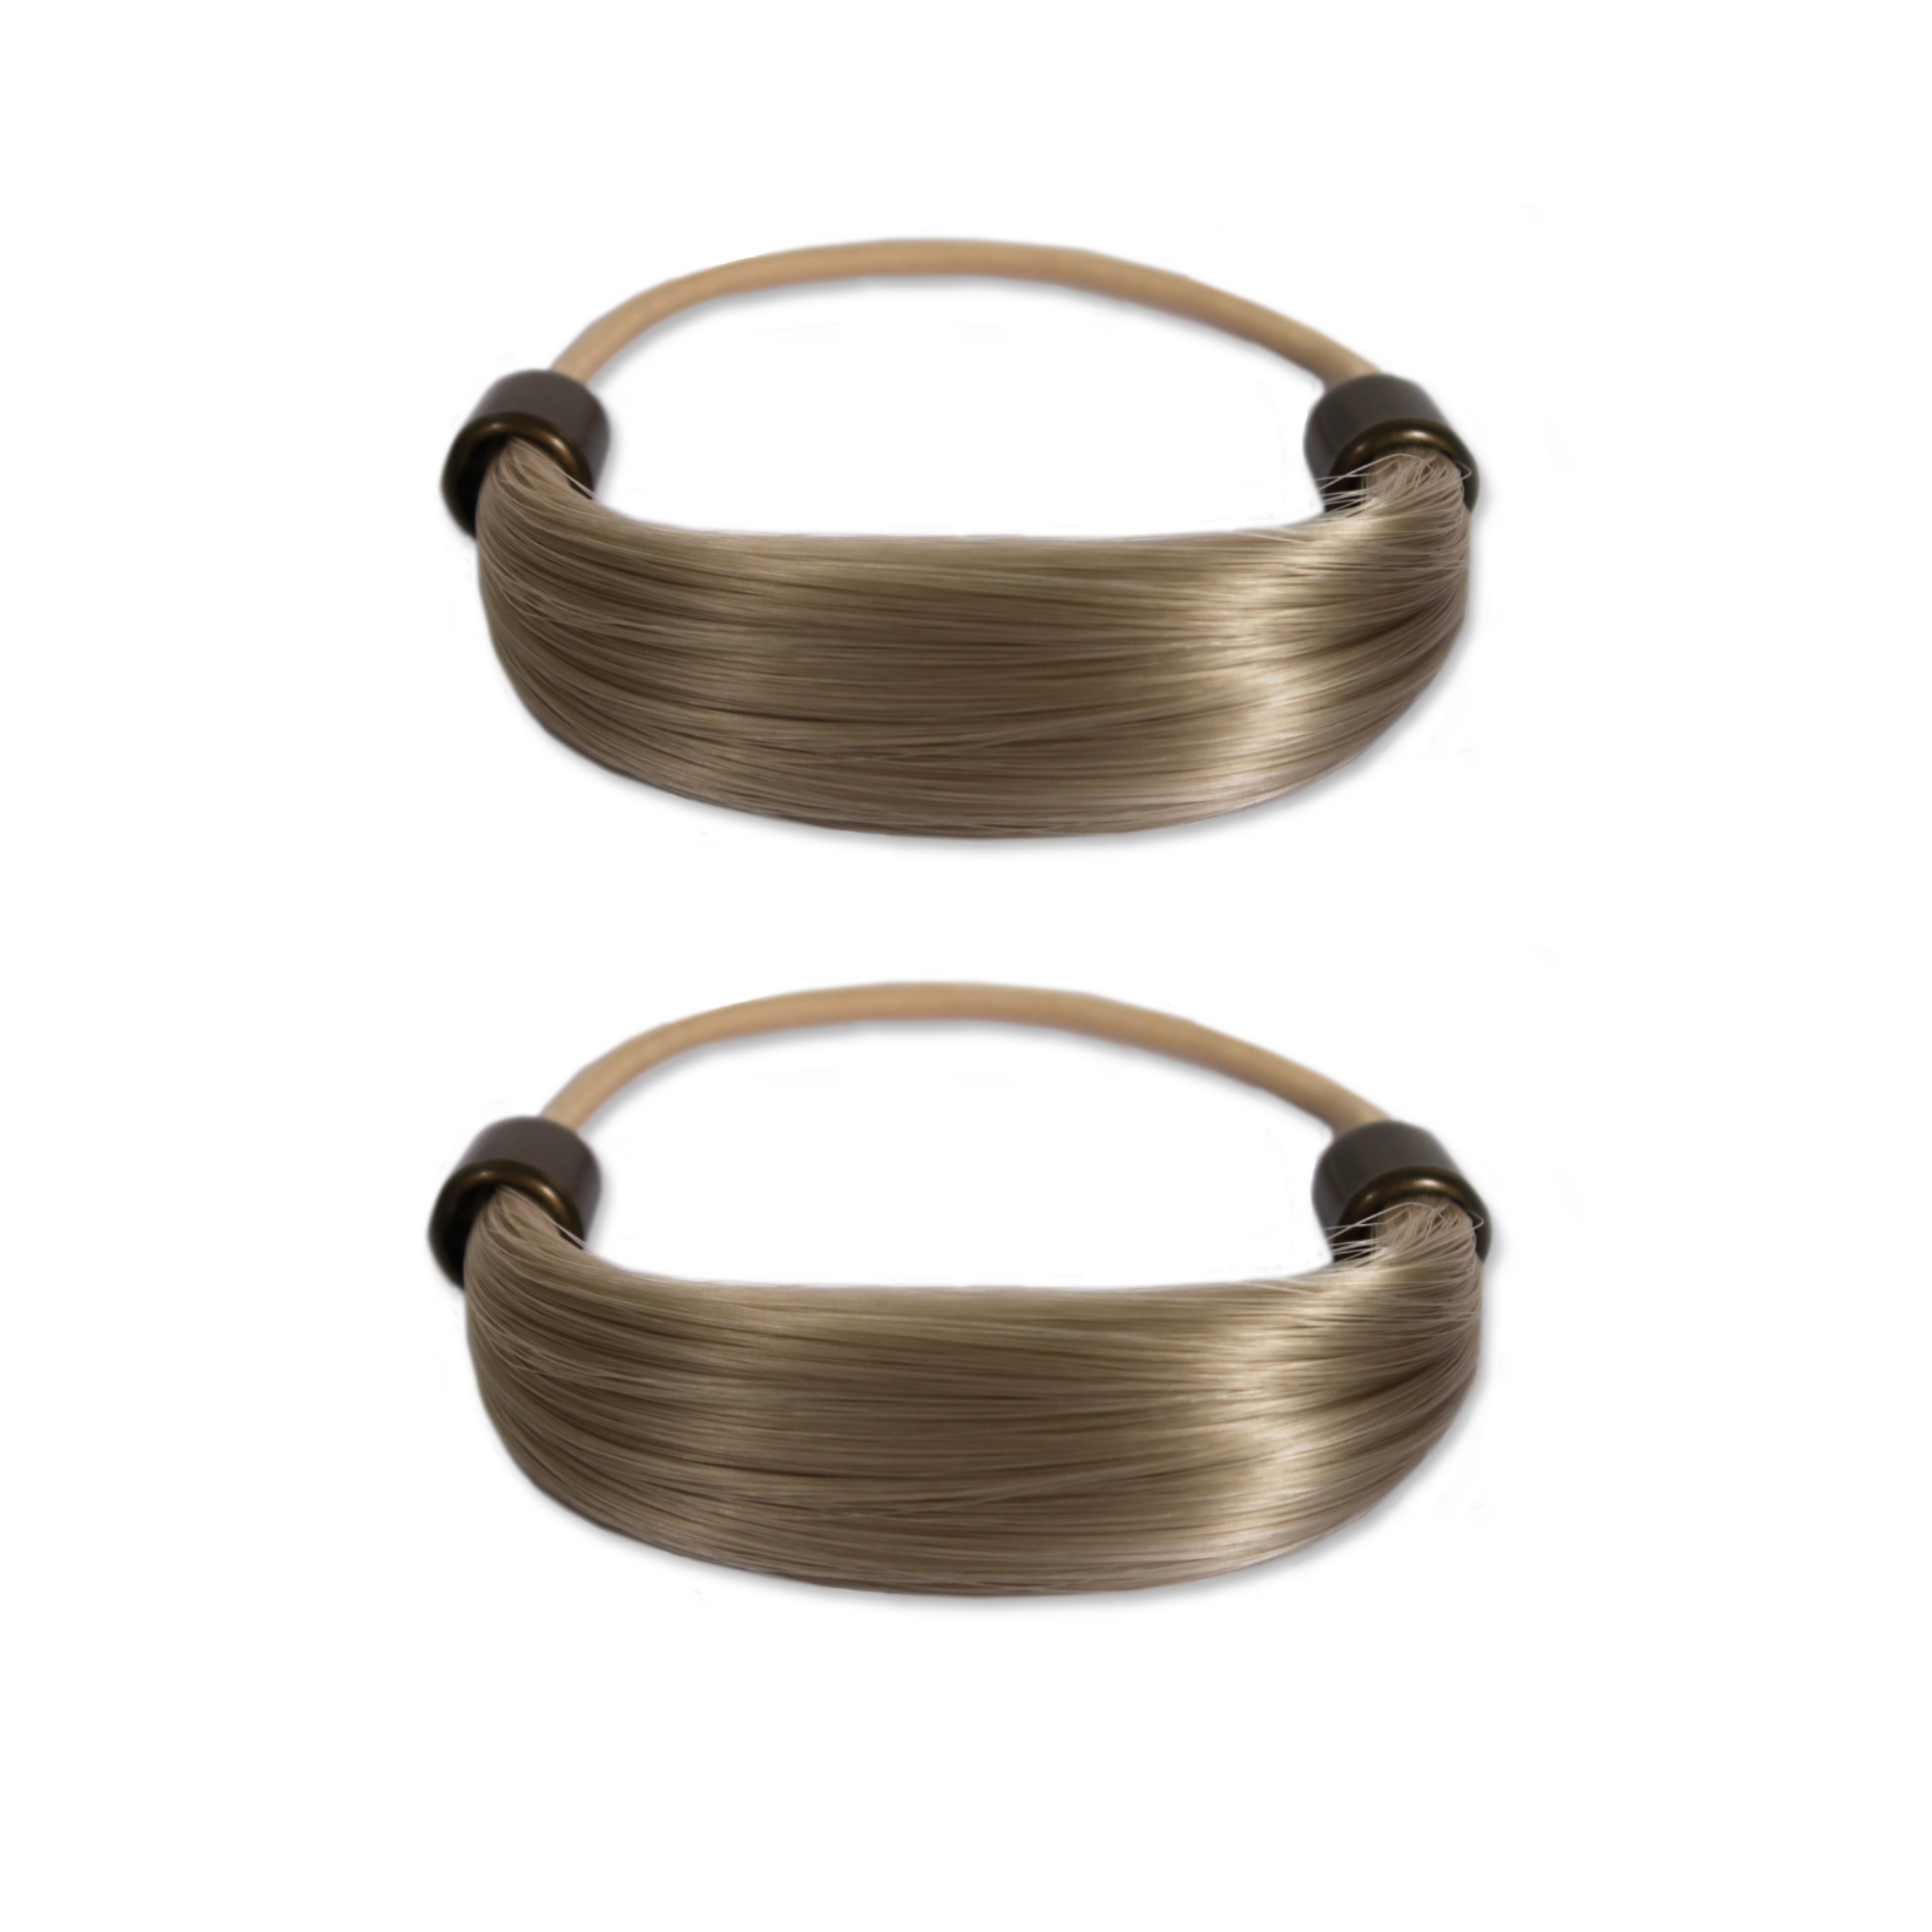 PONY-O Ponytail Holders: Learn how to use our bendable hair ties. 